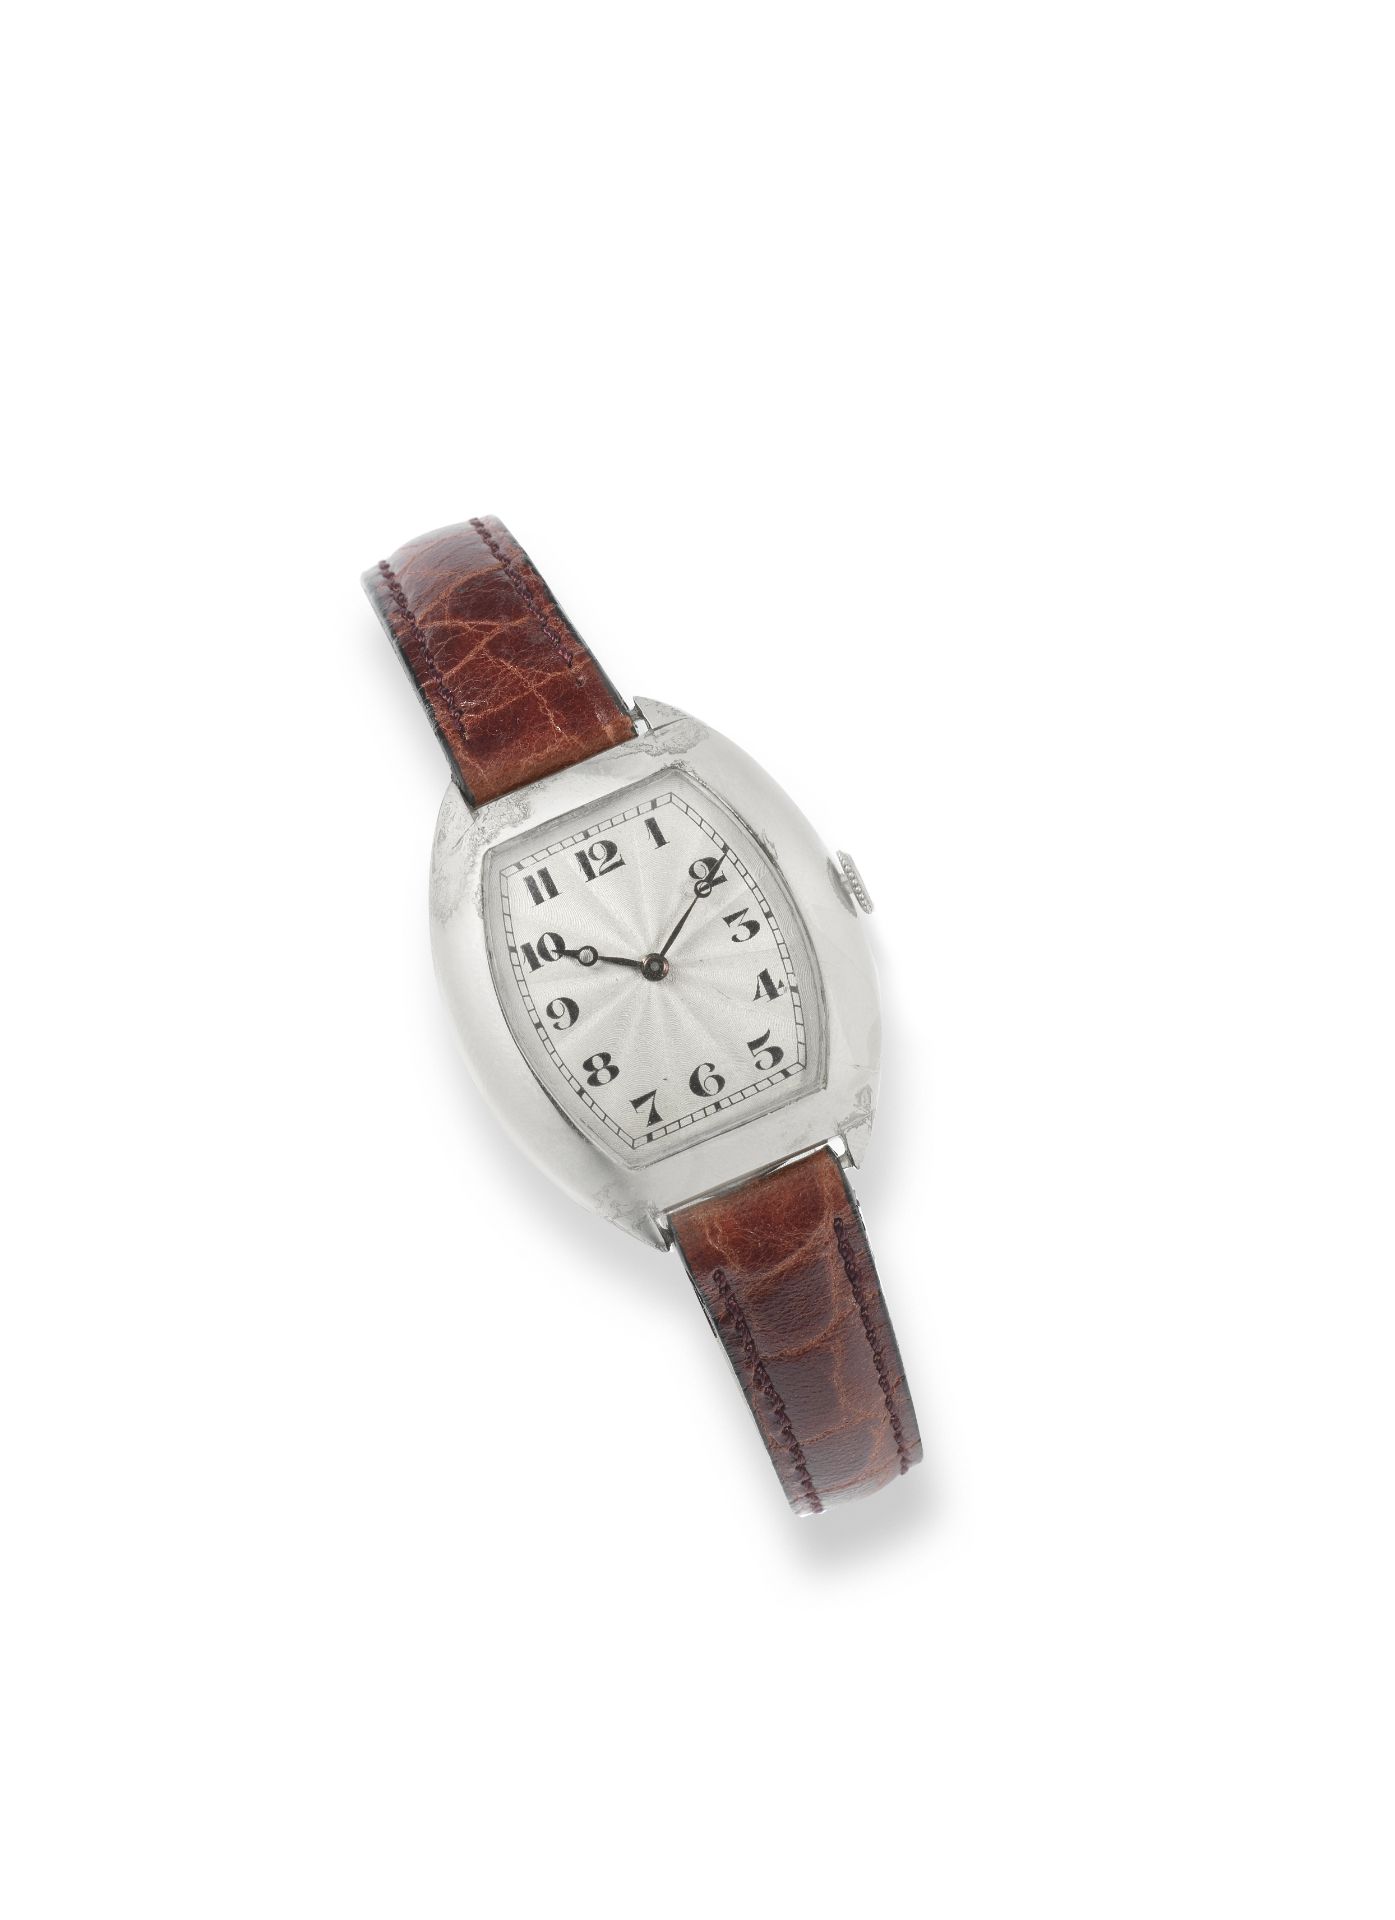 Attributed to Cartier. An early 18K white gold manual wind tonneau form wristwatch Circa 1926